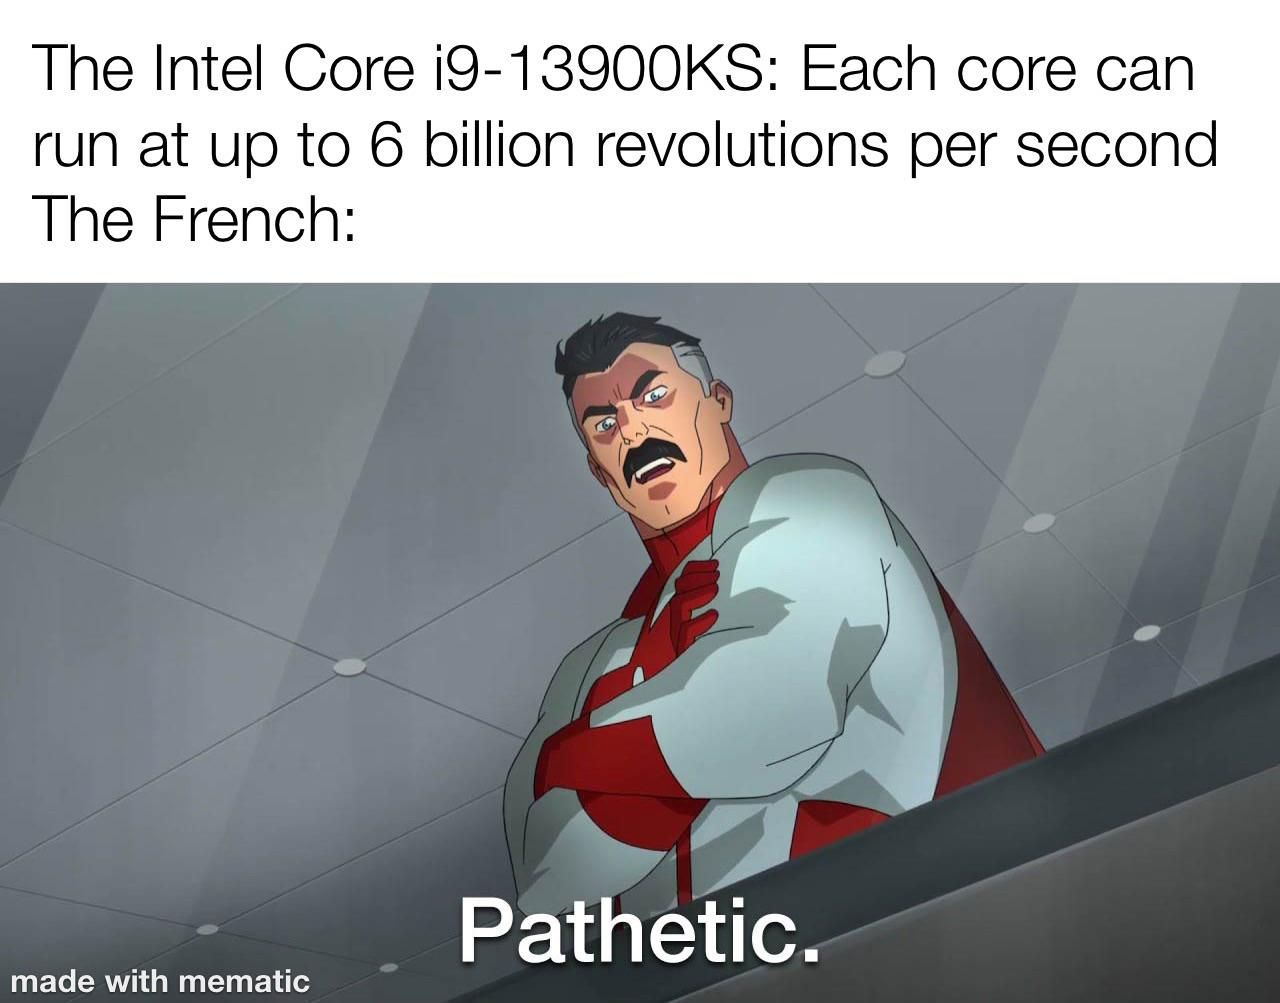 This was not sponsored by Intel, I myself run an AMD system